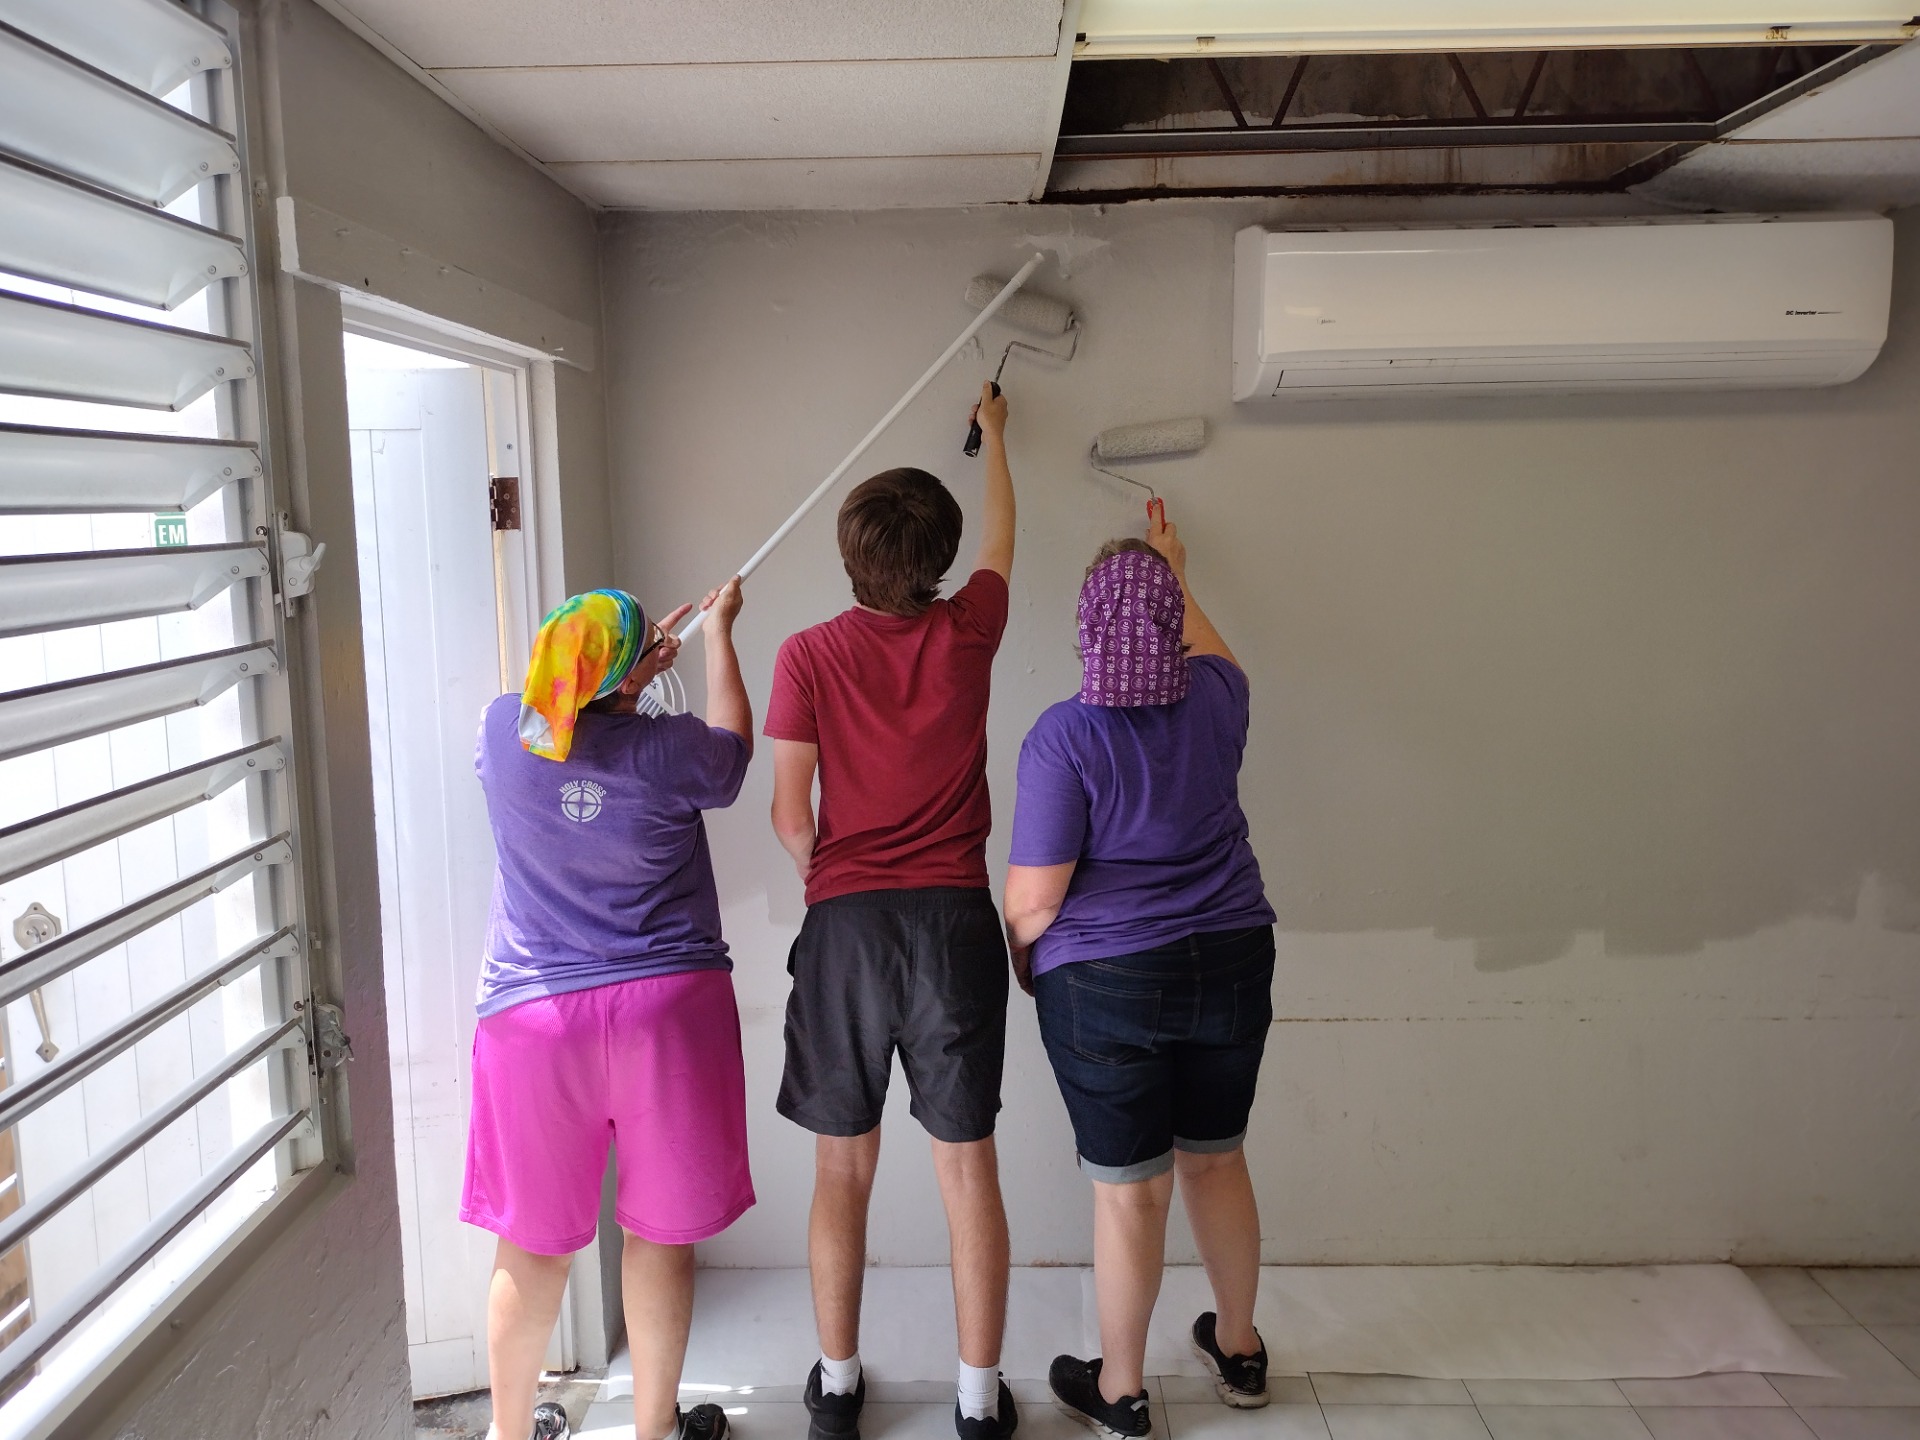 Painting classrooms